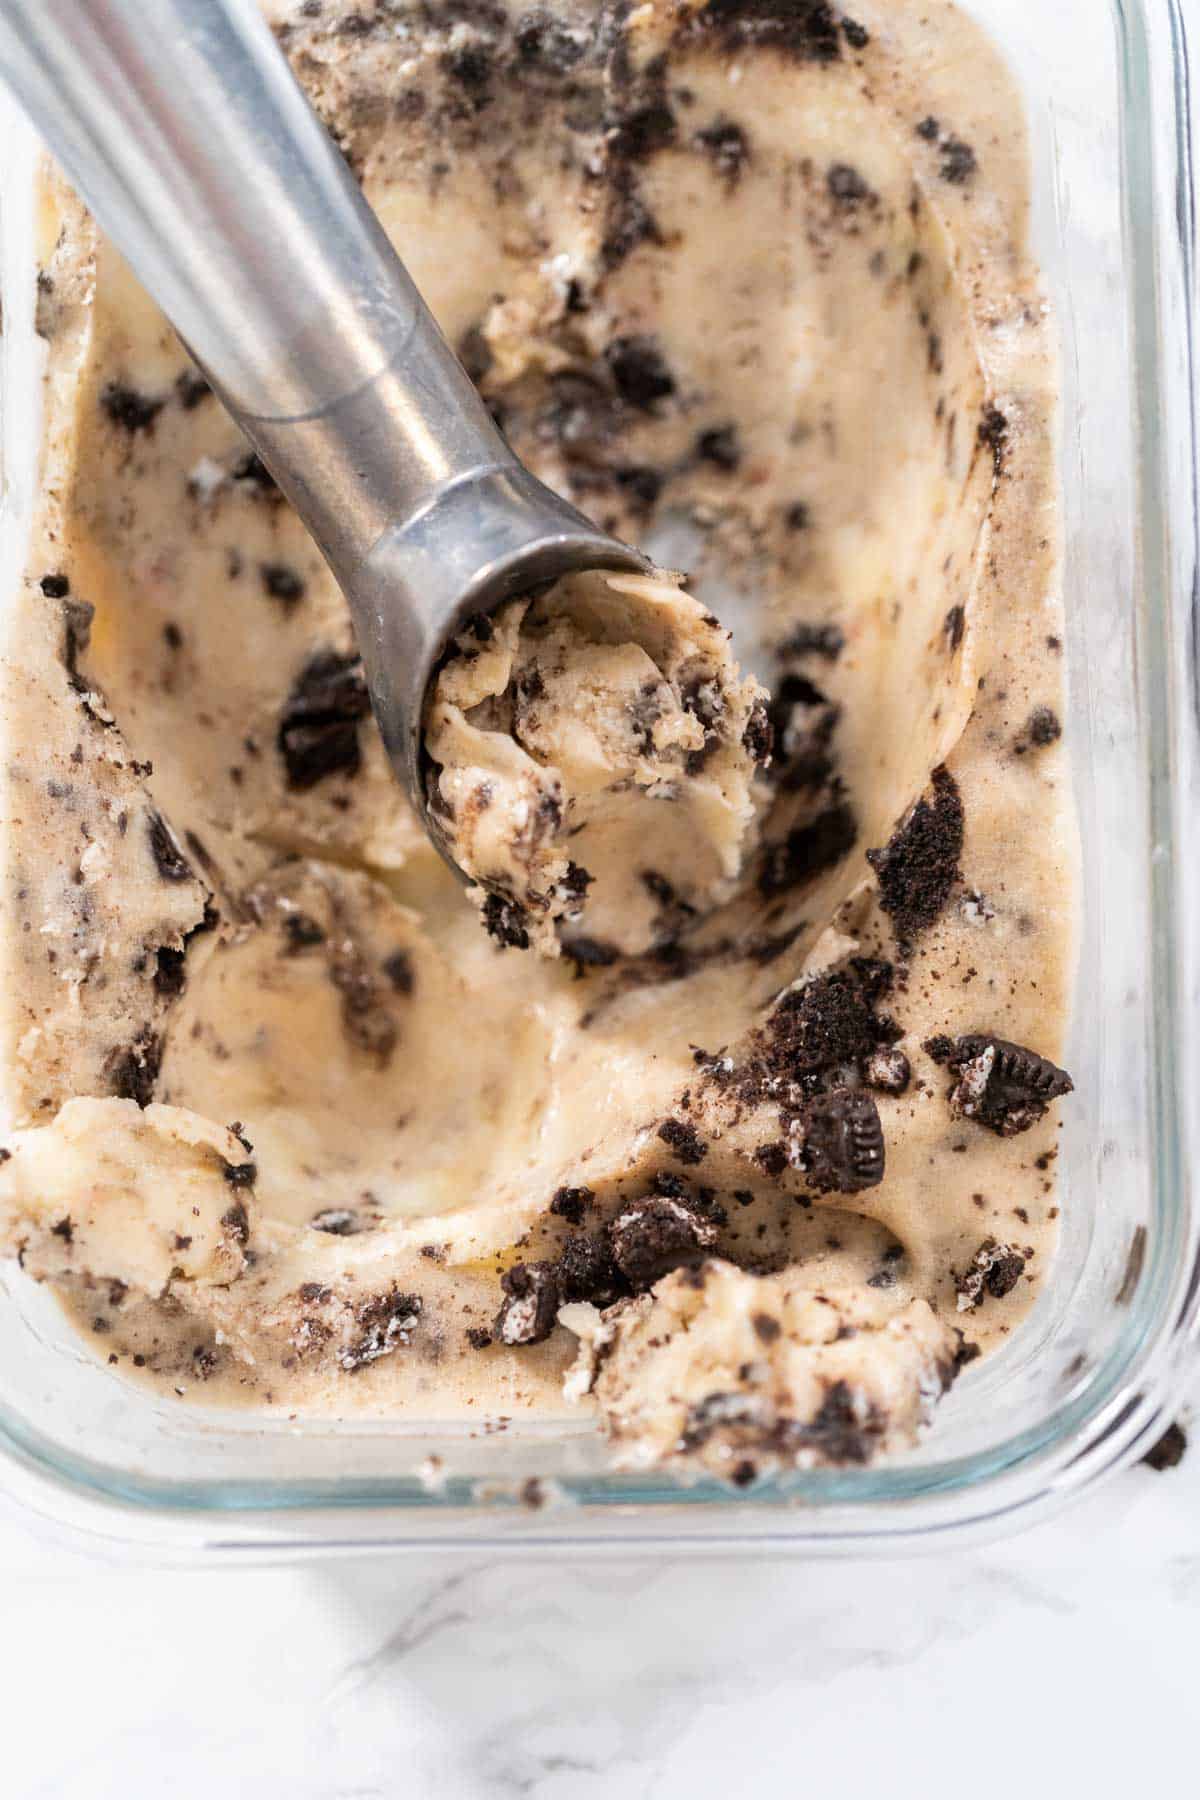 A close up image of Cookies and Cream Nice Cream in a glass container with a metal ice cream scoop.